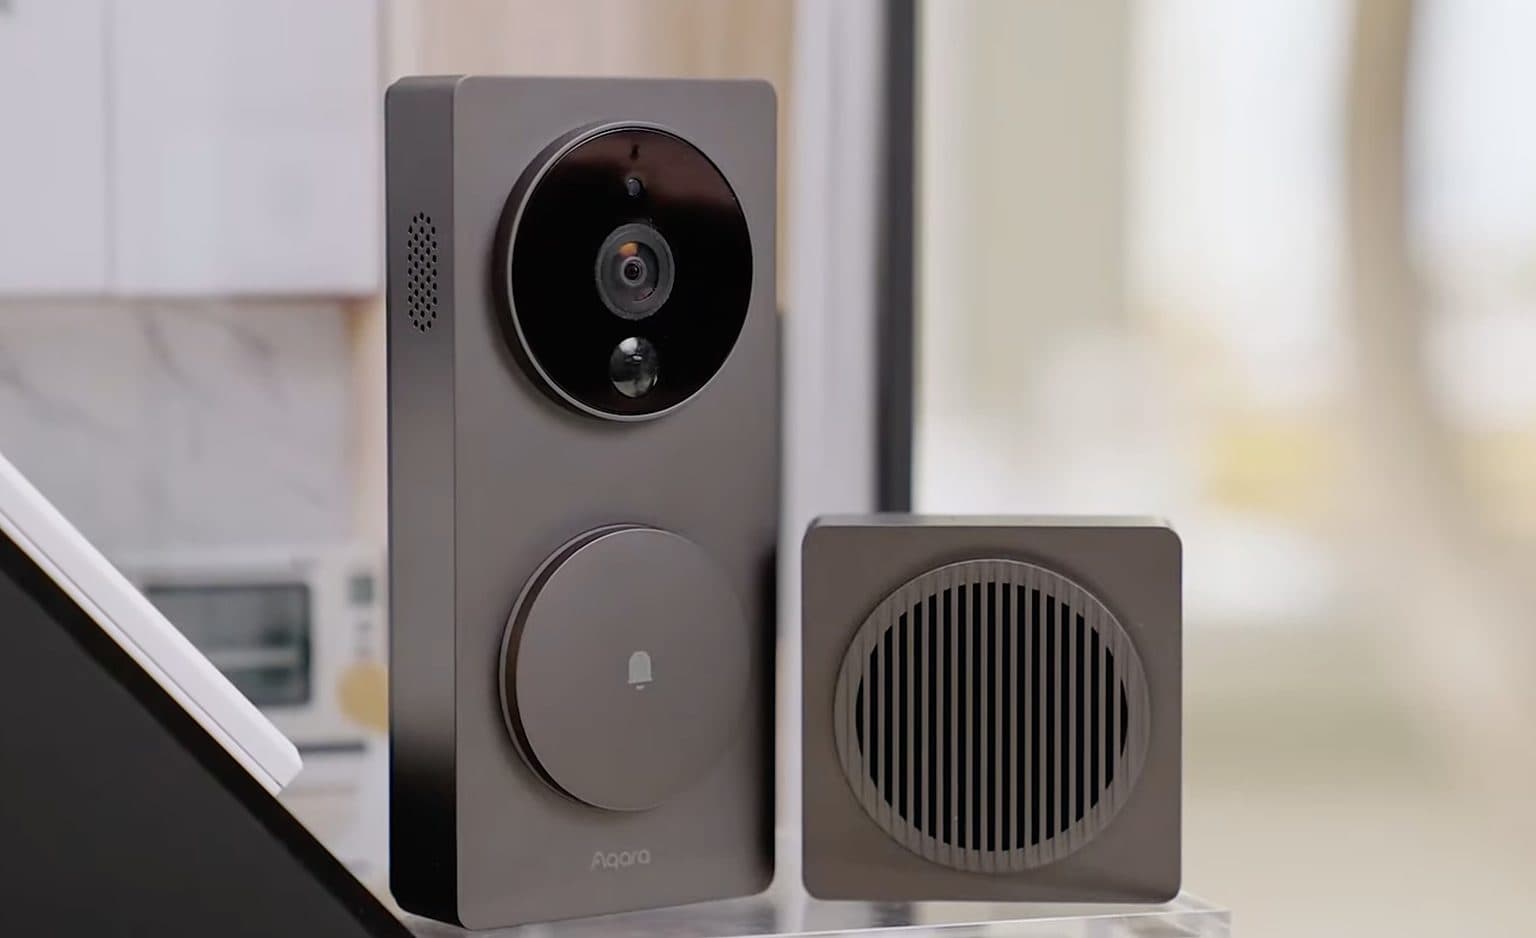 With AI onboard, the new Aqara G4 Video Doorbell can recognize people.